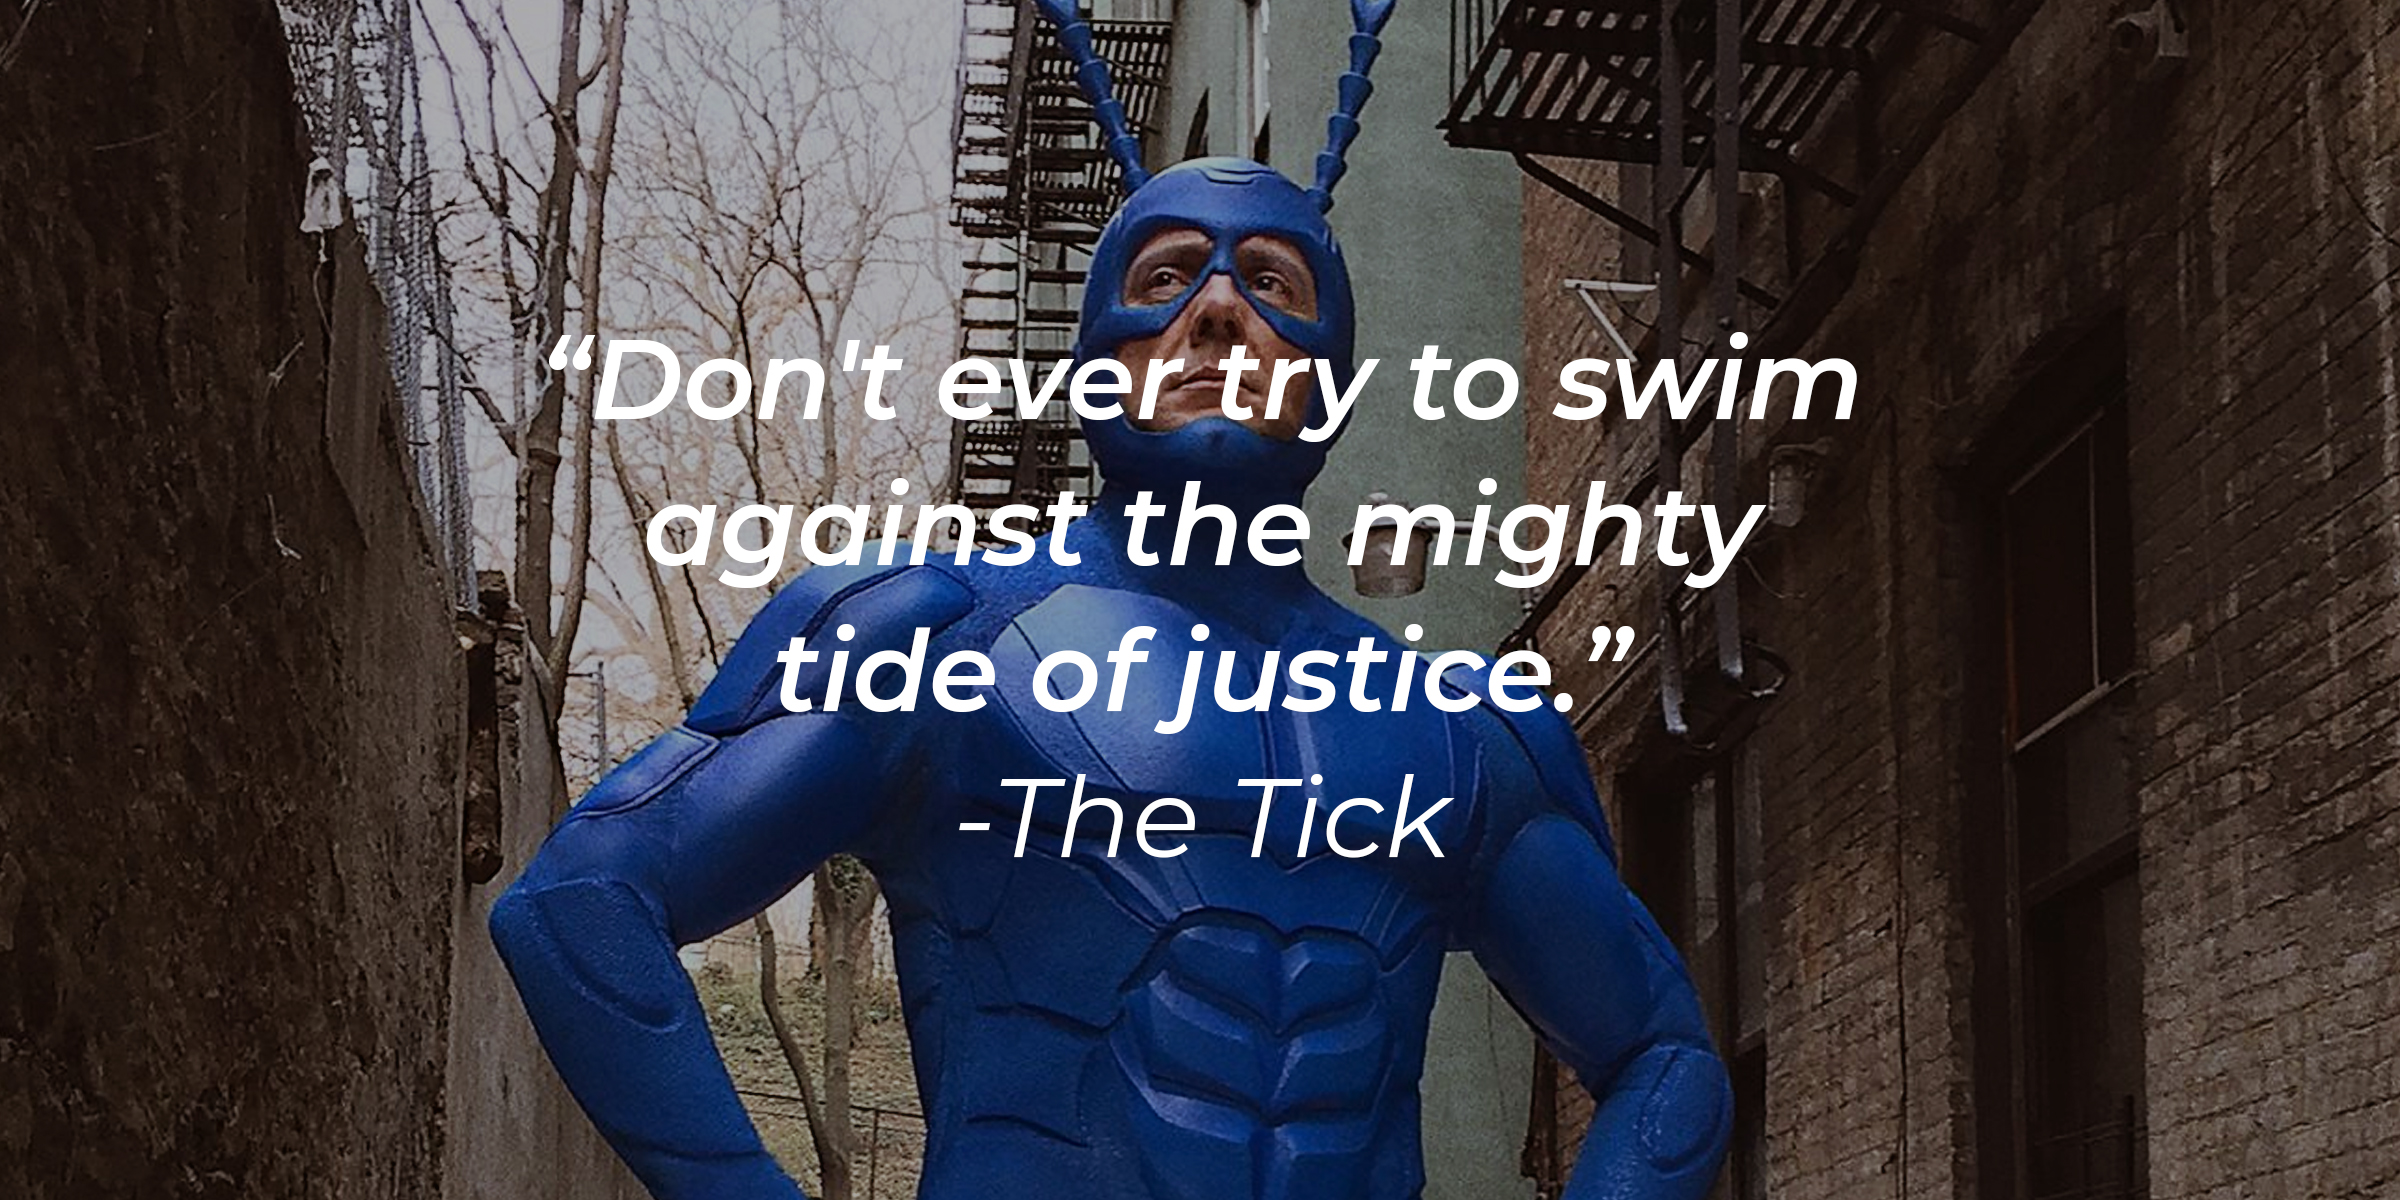 The Tick's quote: "Don't ever try to swim against the mighty tide of justice." | Source: Facebook.com/TheTick